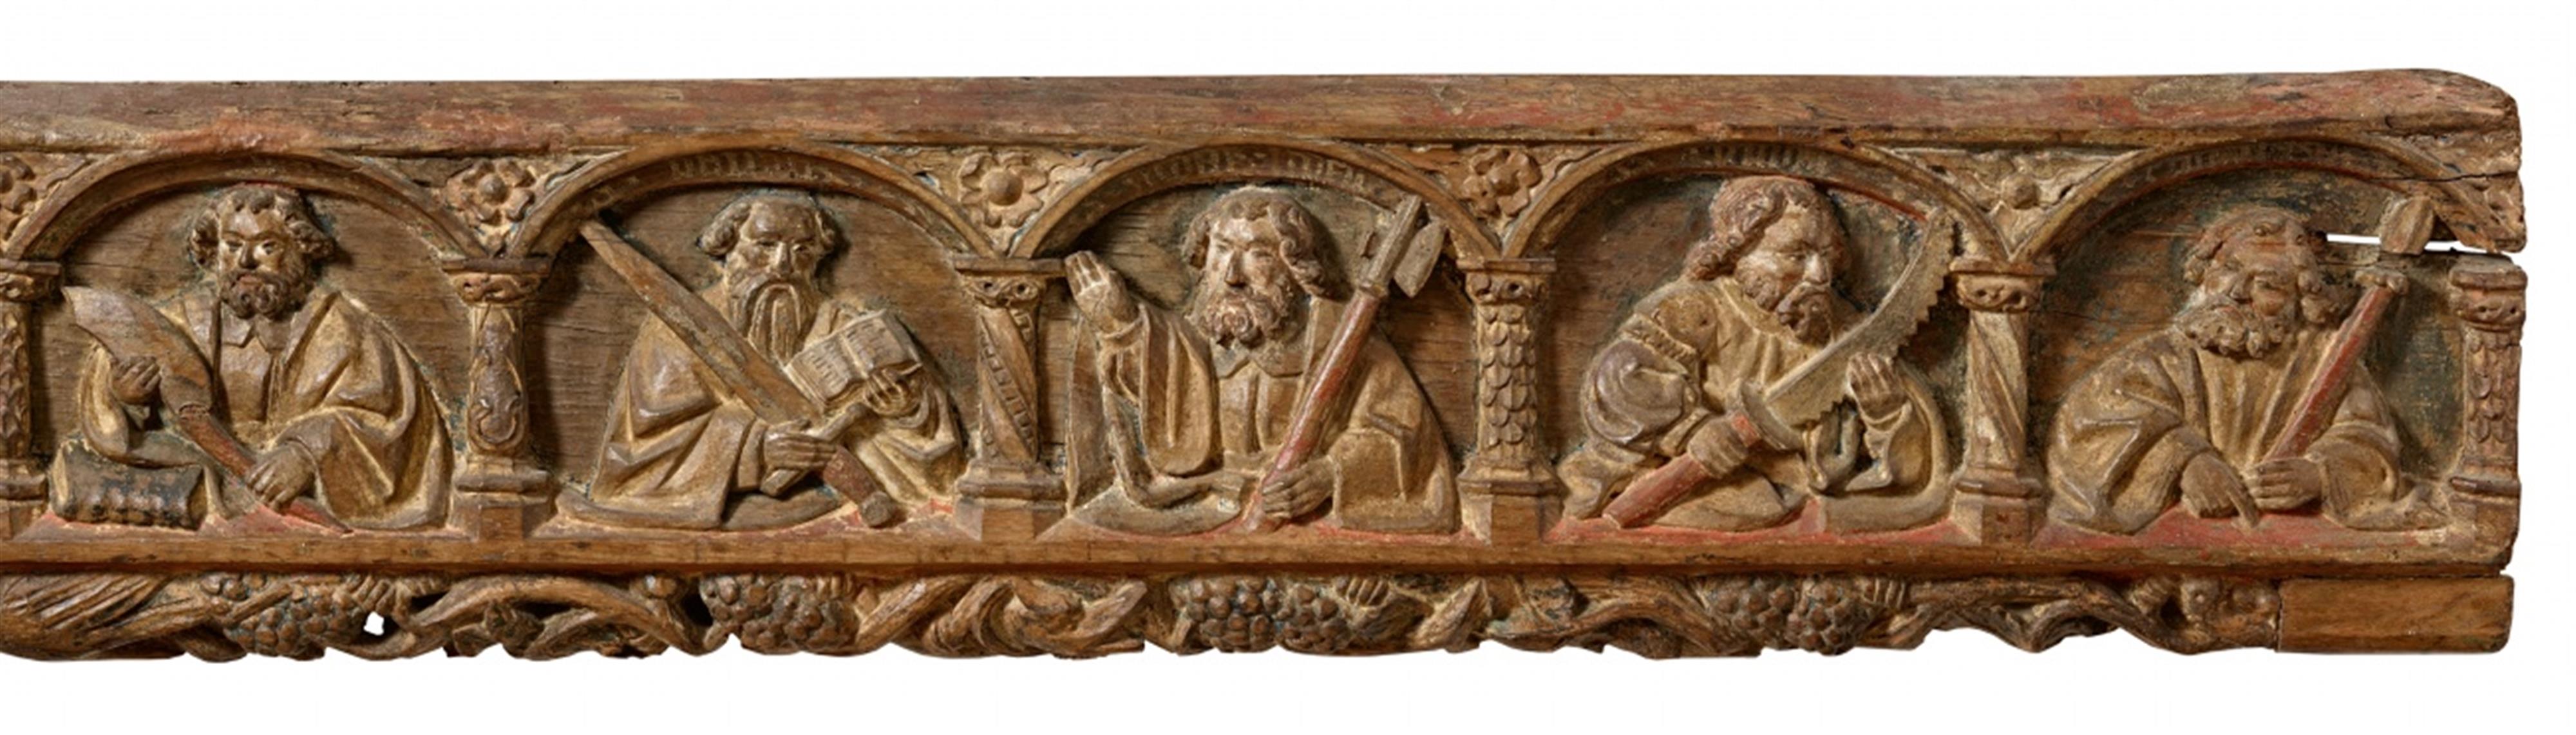 Probably Lower Rhine Region circa 1530 - A carved wooden relief of Christ and the Apostles (apostle beam), probably Lower Rhine-Region, circa 1530 - image-4